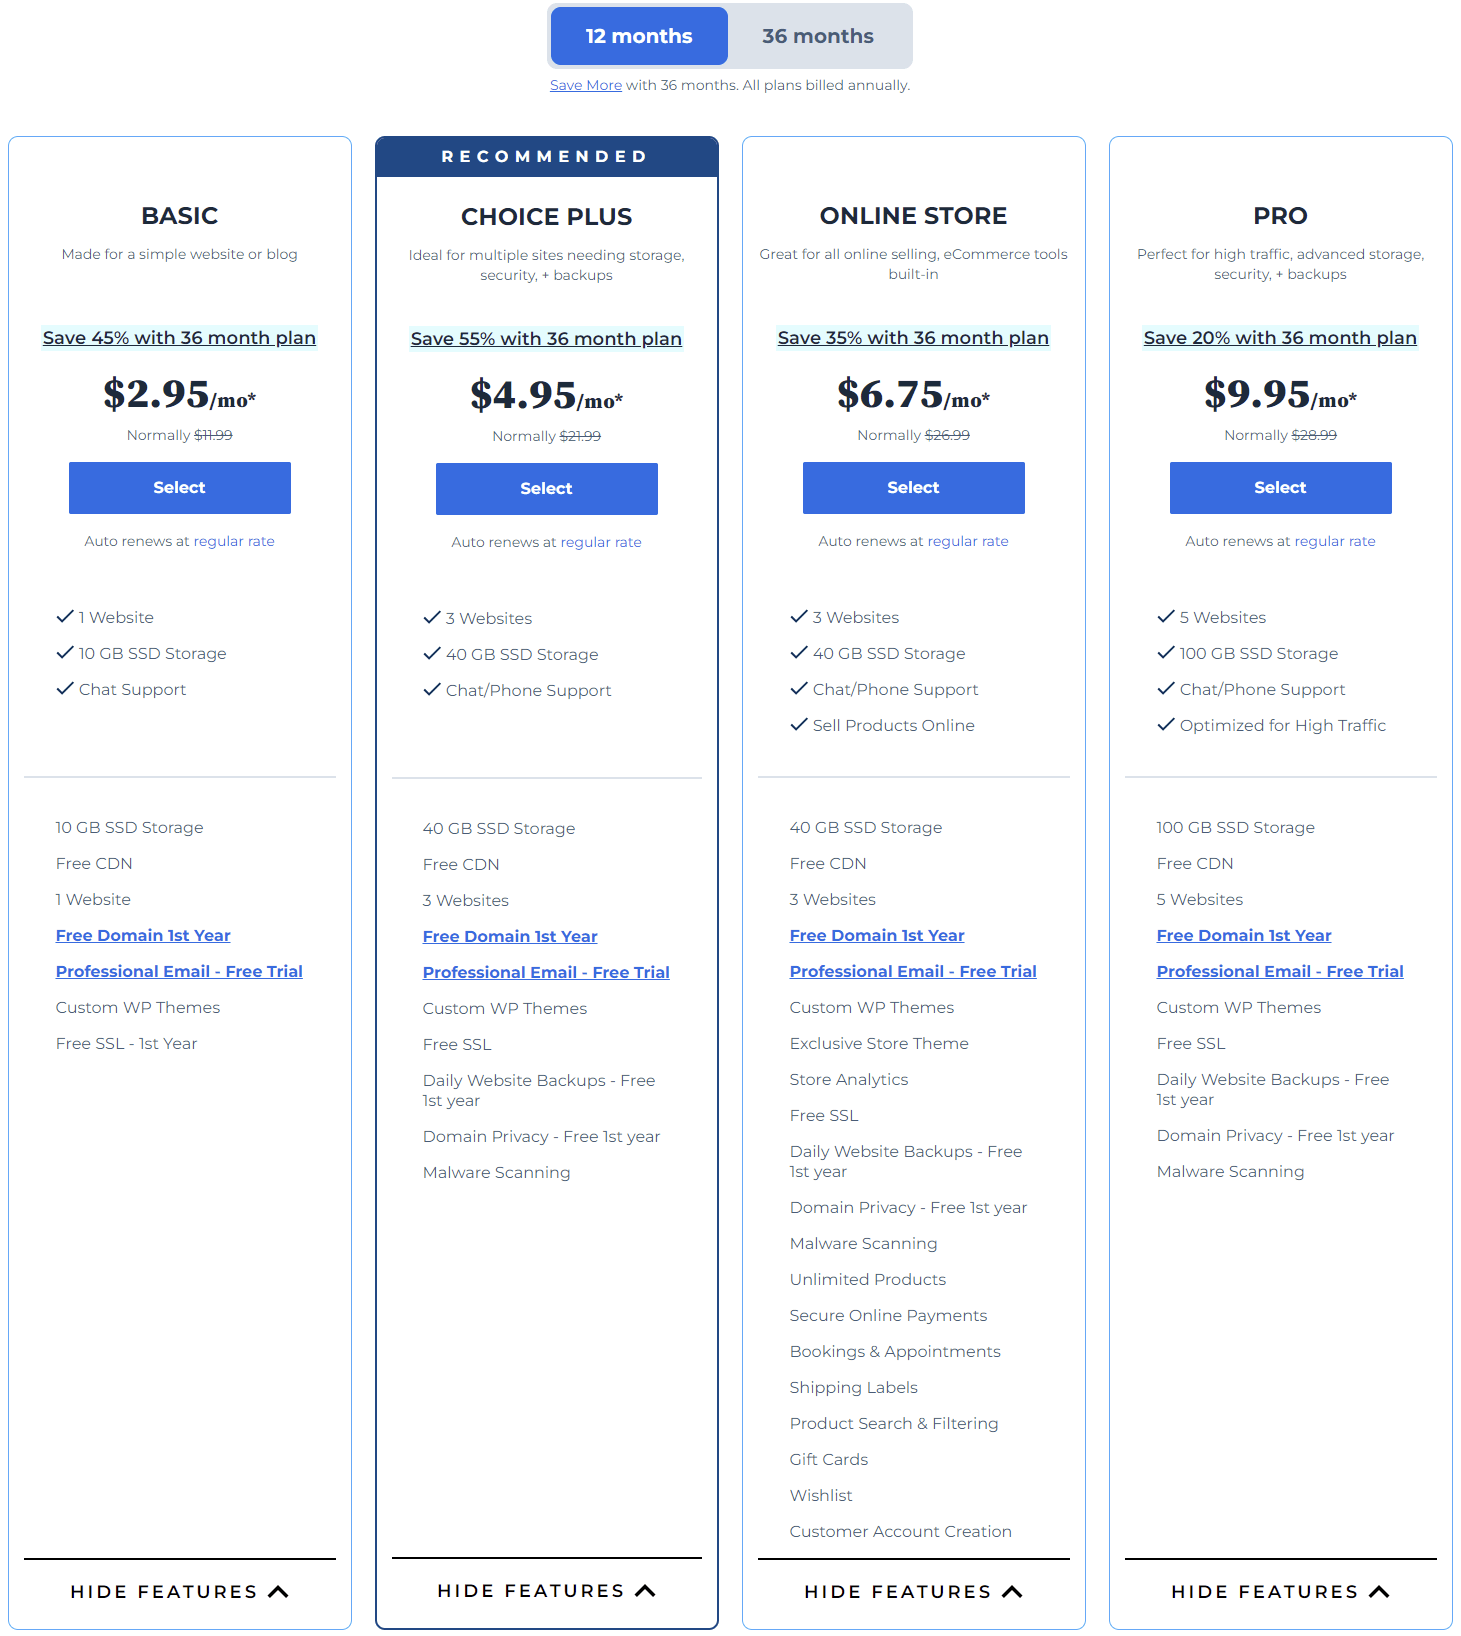 Shared hosting pricing plans by Bluehost